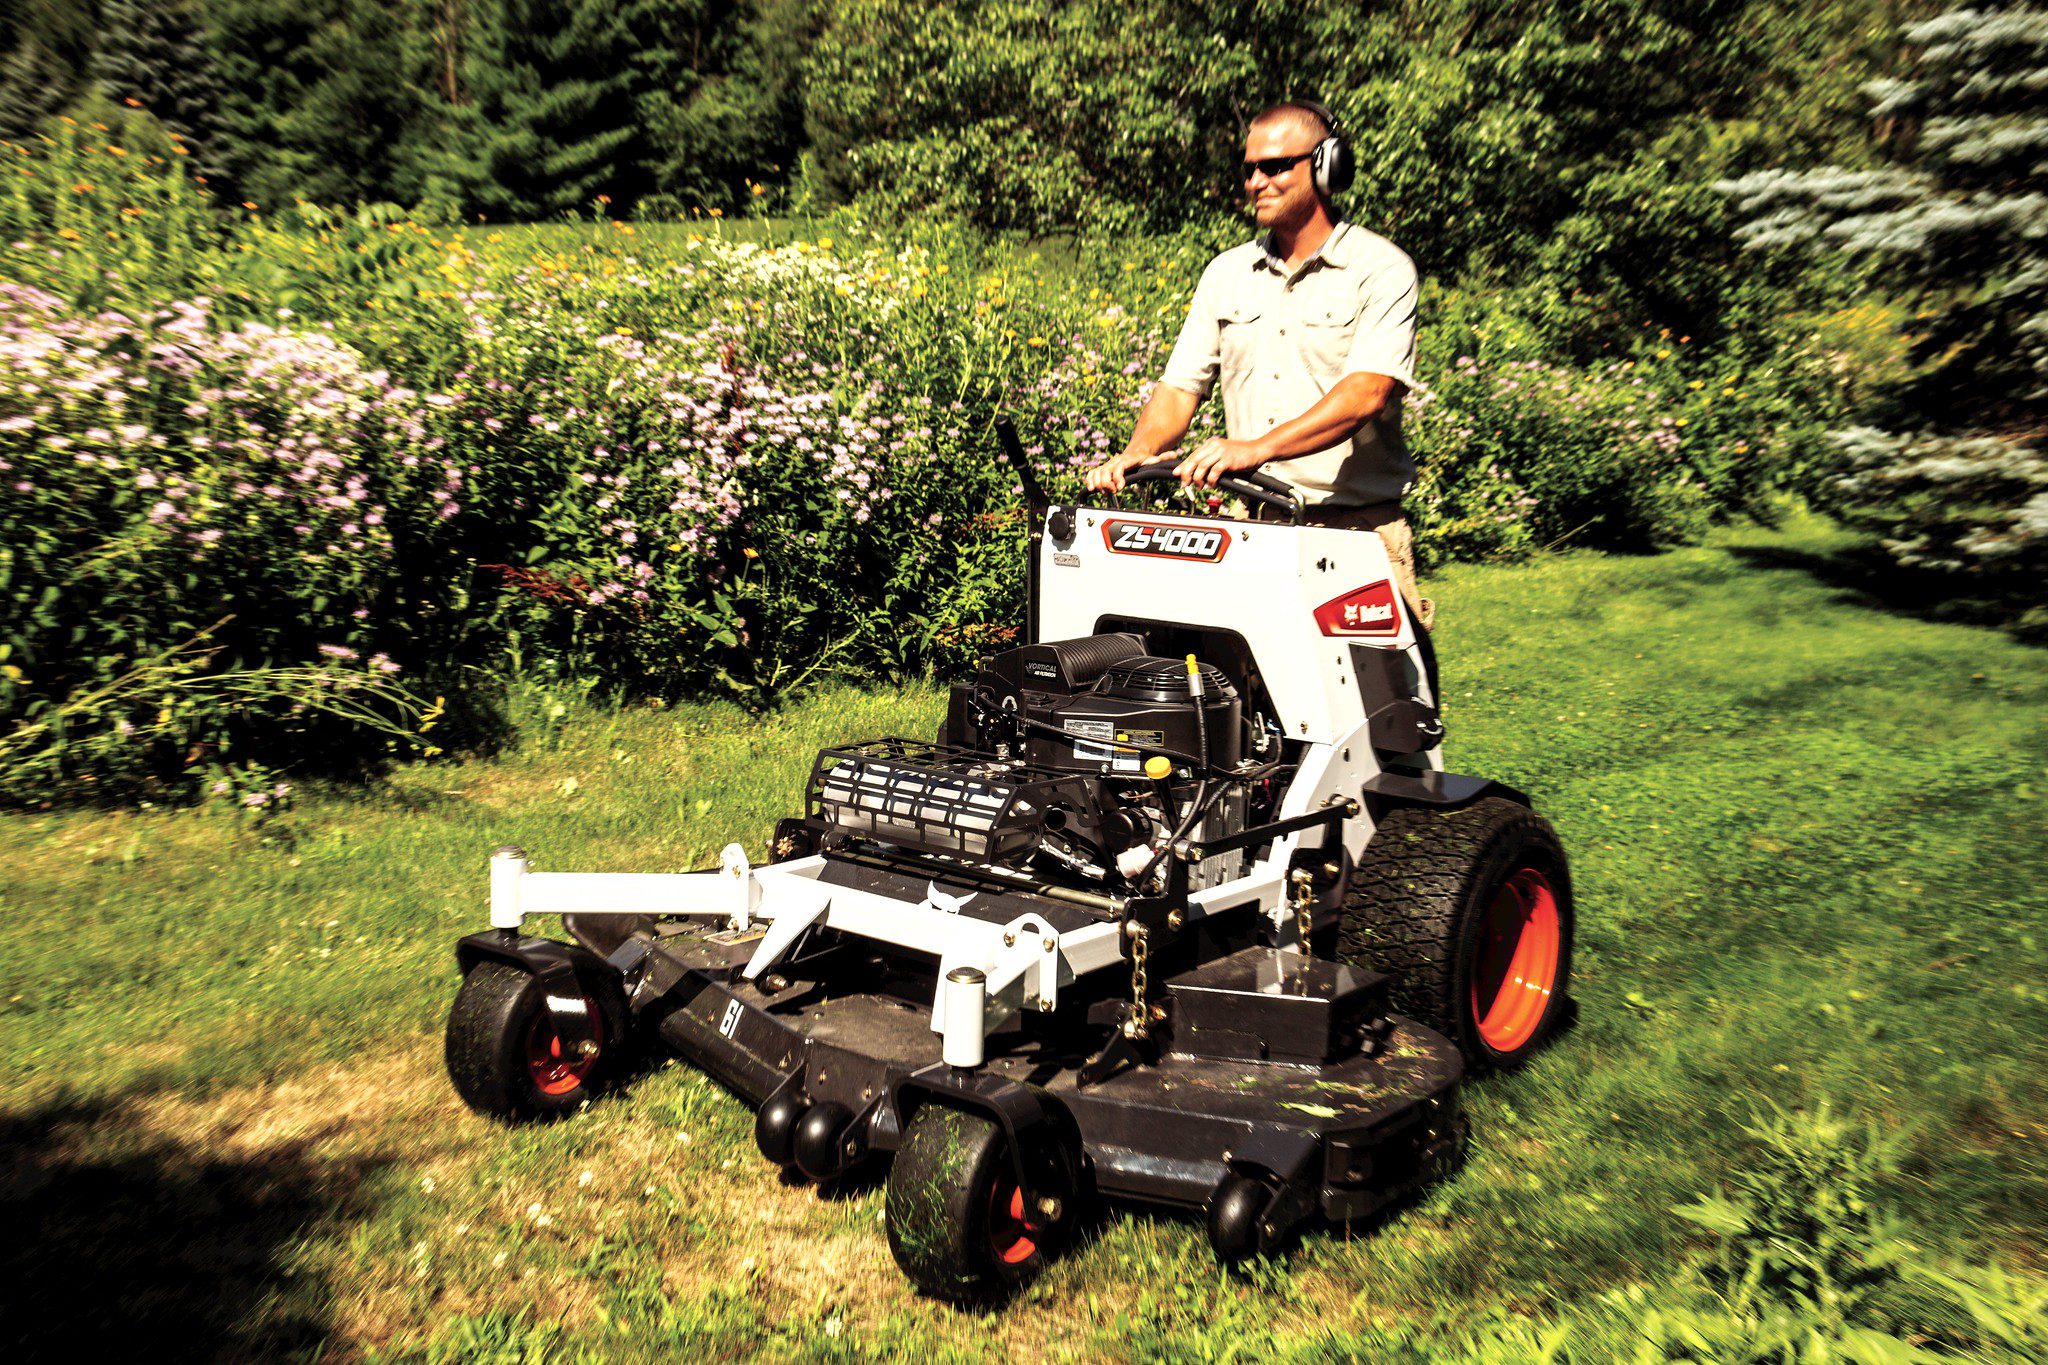 Browse Specs and more for the ZS4000 Stand-On Mower 48″ - Bobcat of North Texas